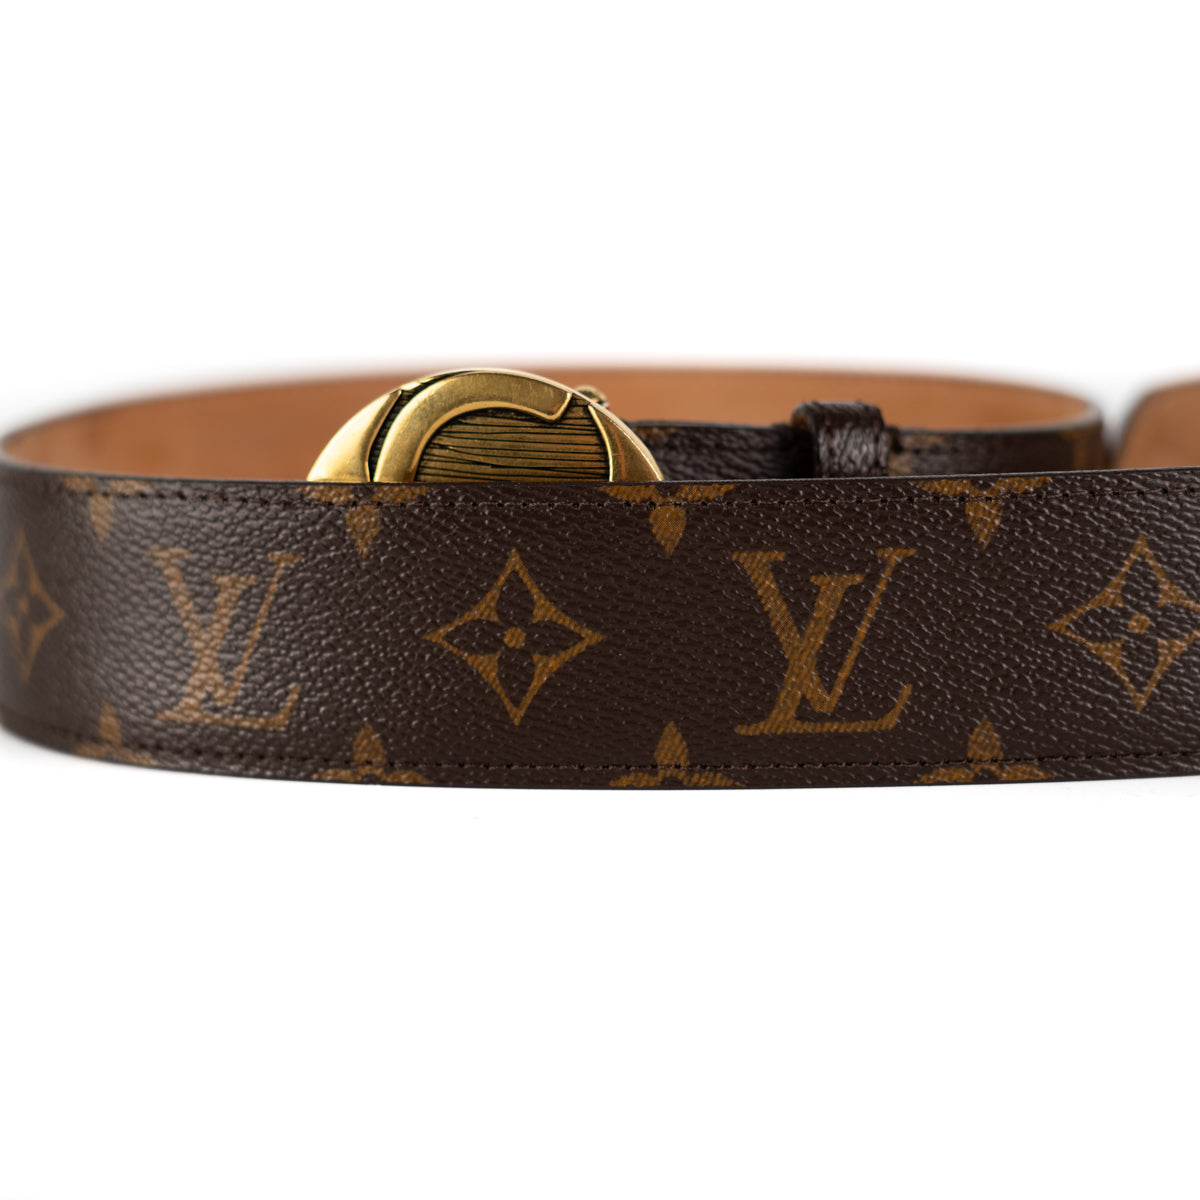 A match made at Pepper's - Combine this Monogram LV belt with this